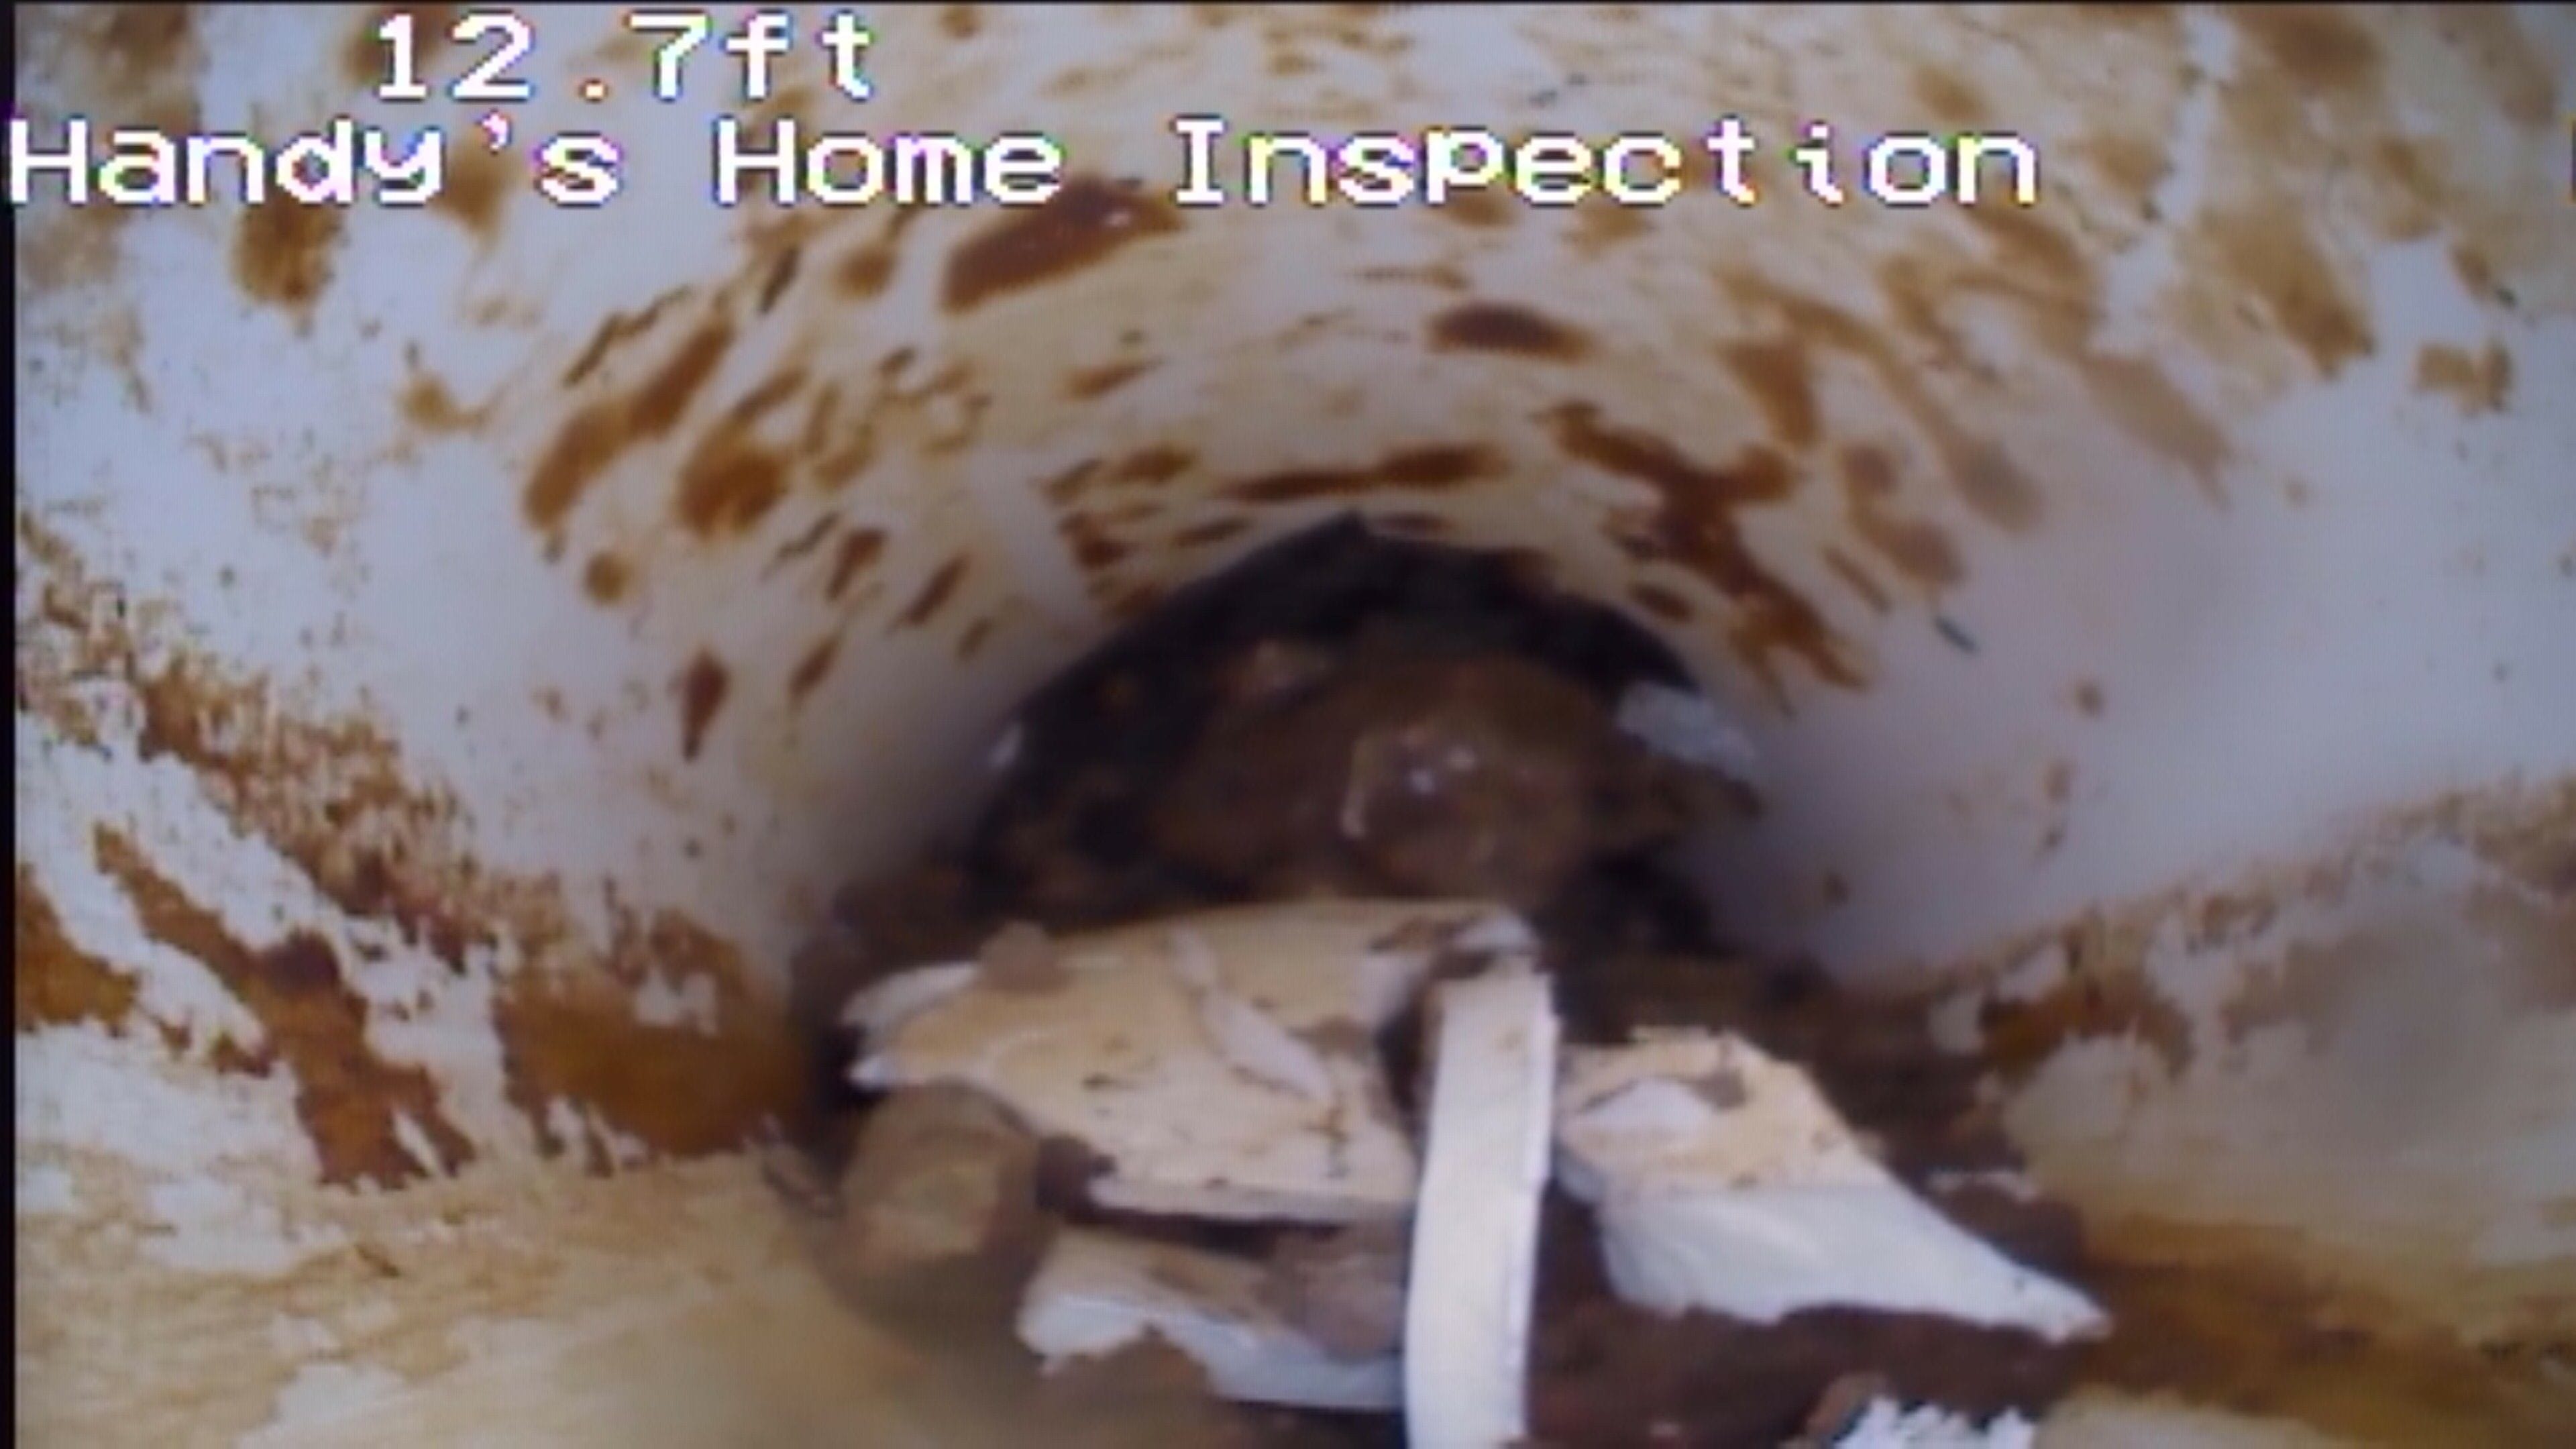 Broken pipe found with camera inspection